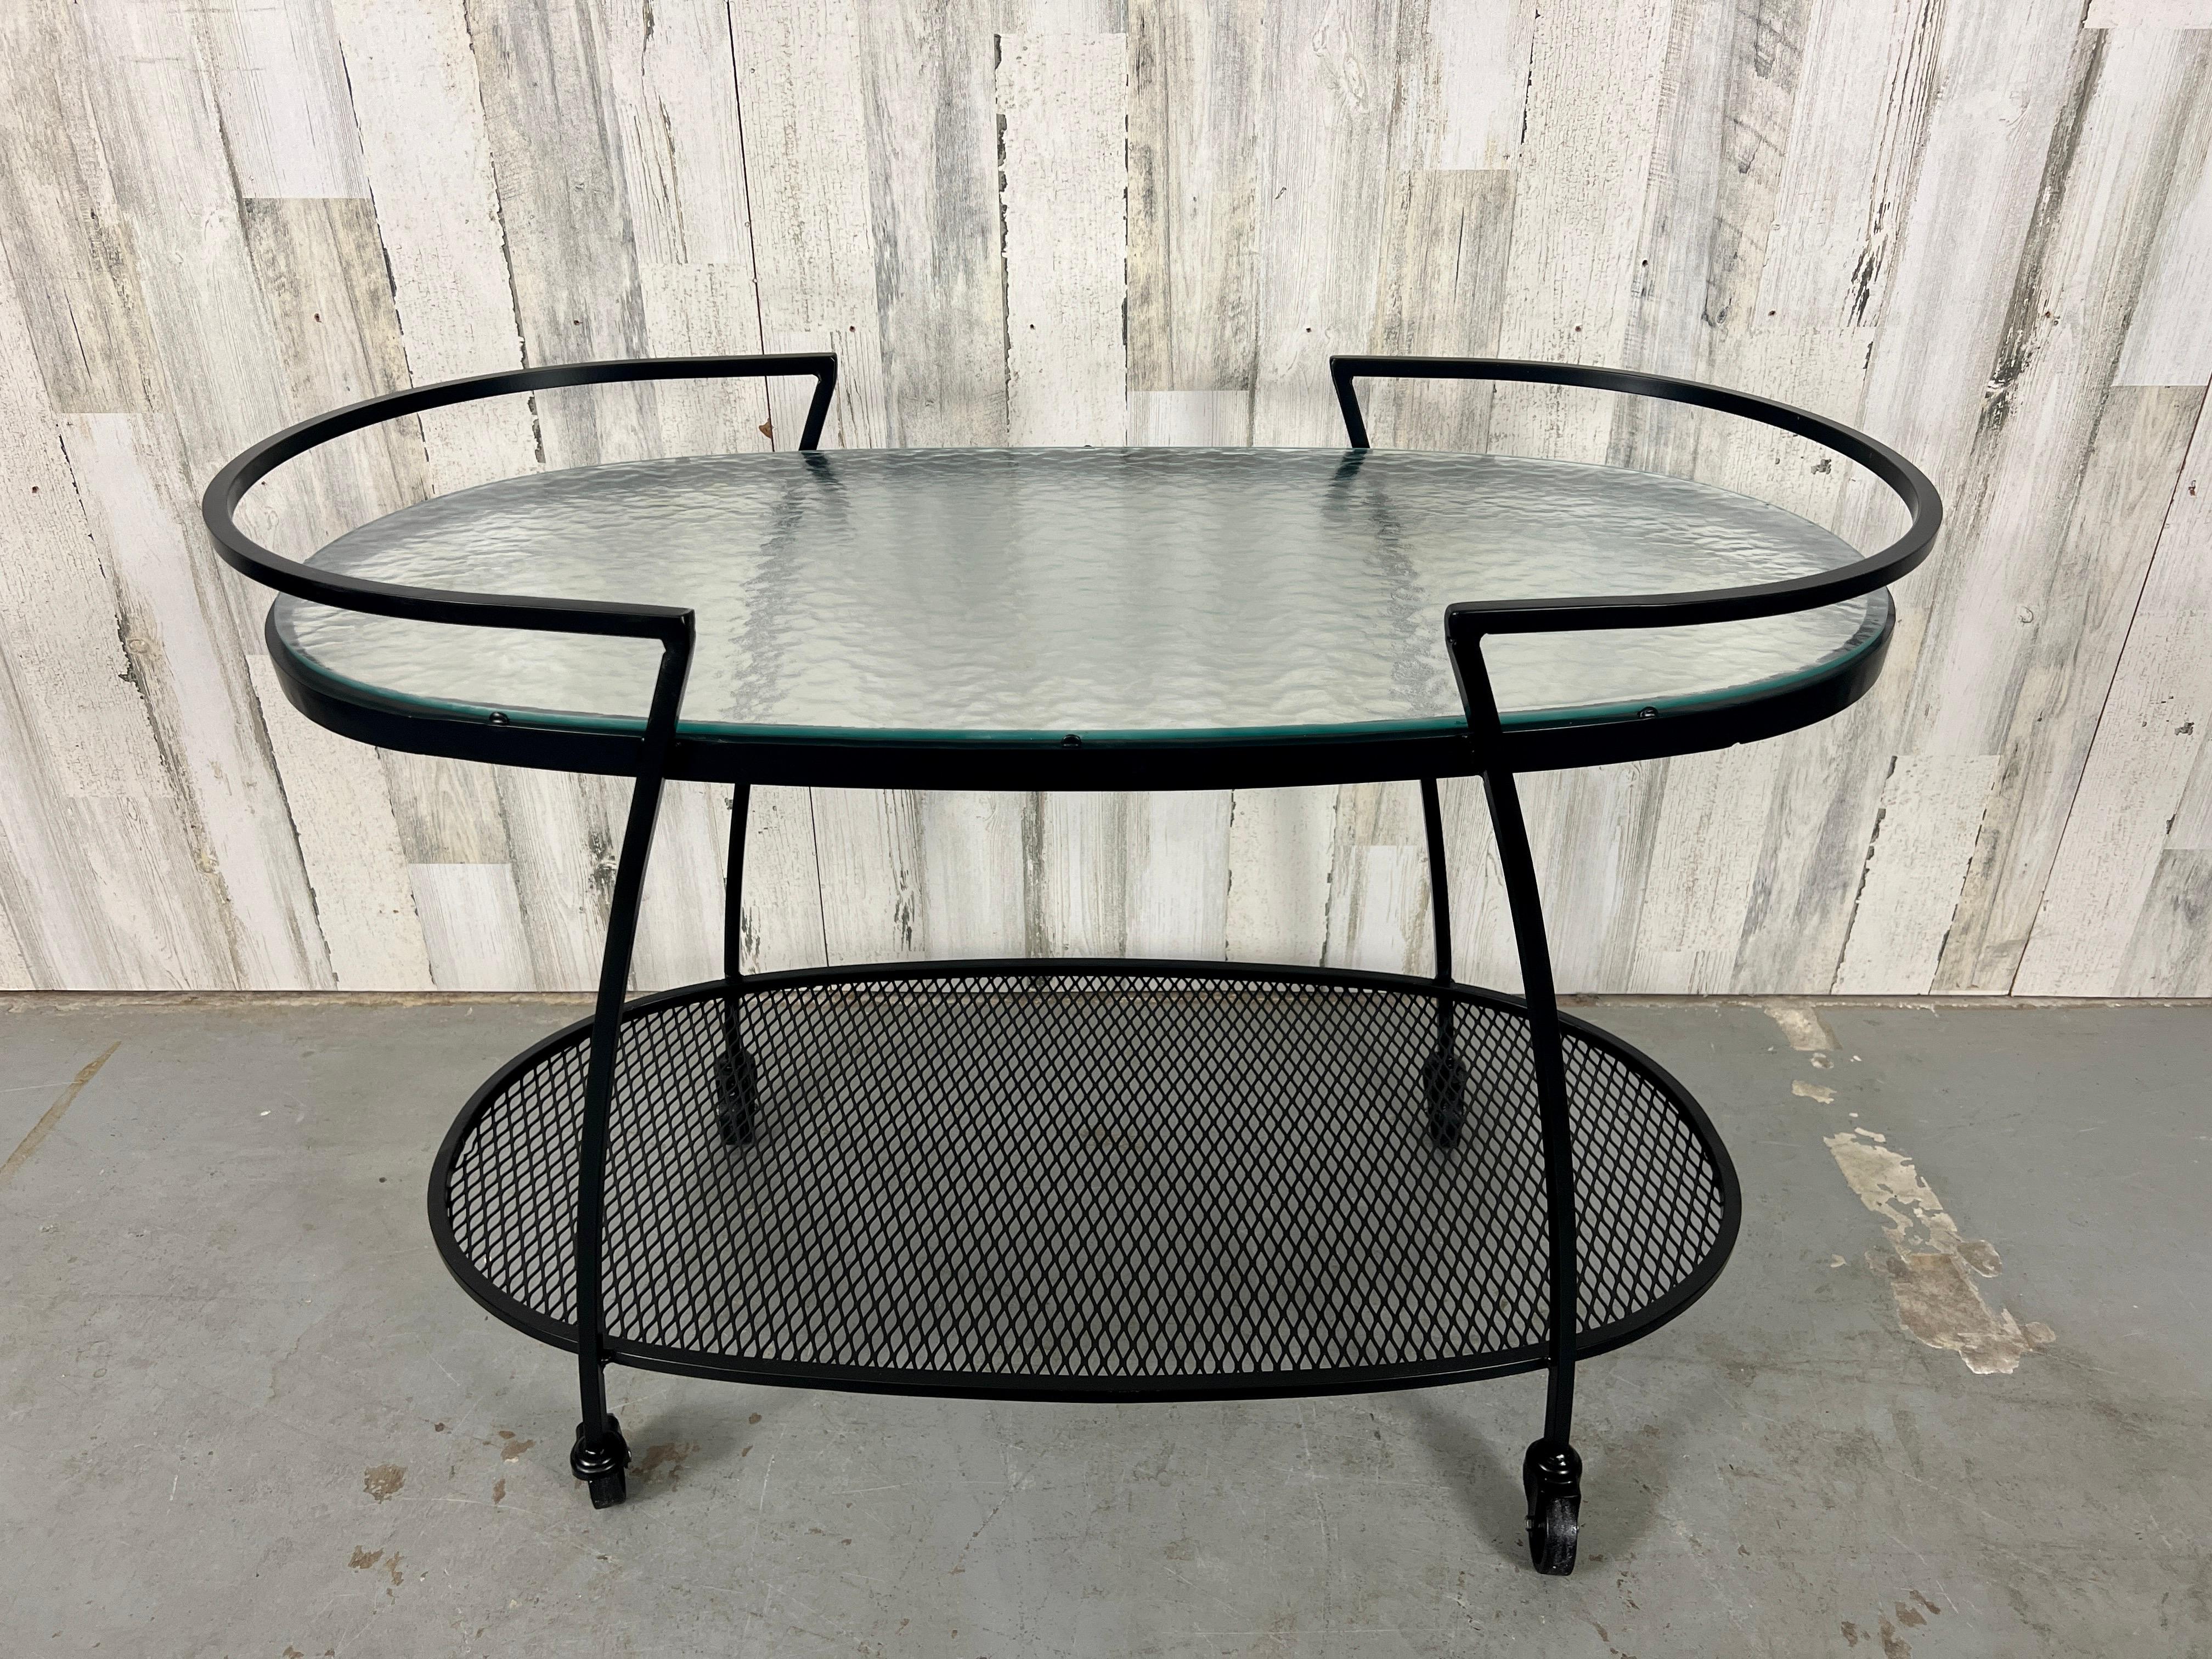 Modernist iron bar cart made by Woodard patio furniture company. Maintains it's original pebble glass with new powder coat coated metal. A beautiful addition to any patio or poolside venue. 